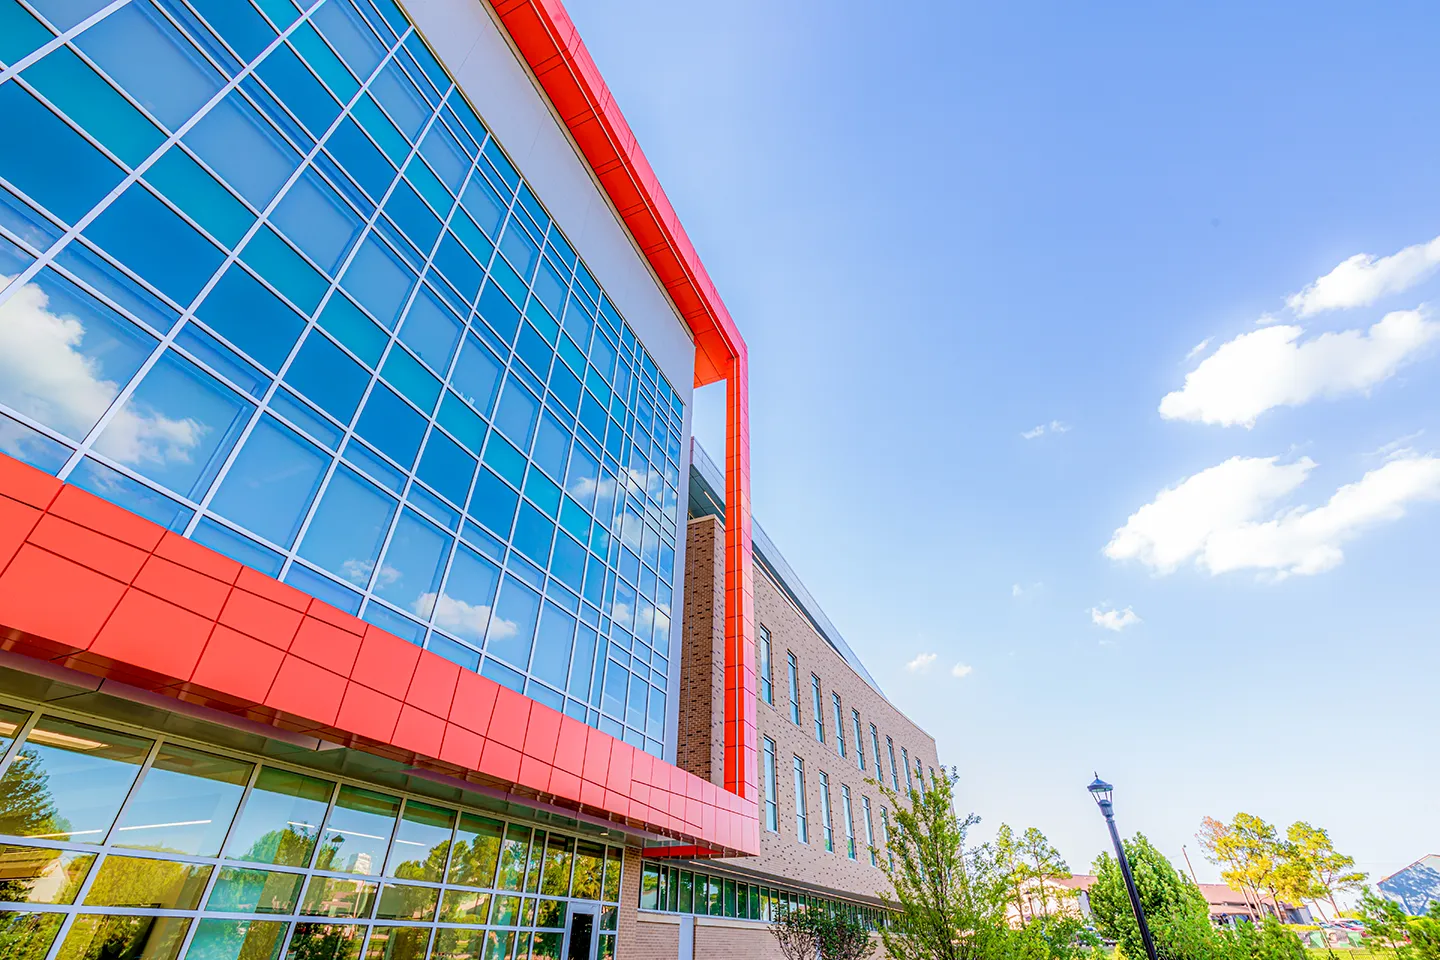 The North Hall Academic Building represents a collaboration between the Office of the Chief Medical Examiner and Oklahoma State University, housing supporting programs on the Health Sciences Center campus.